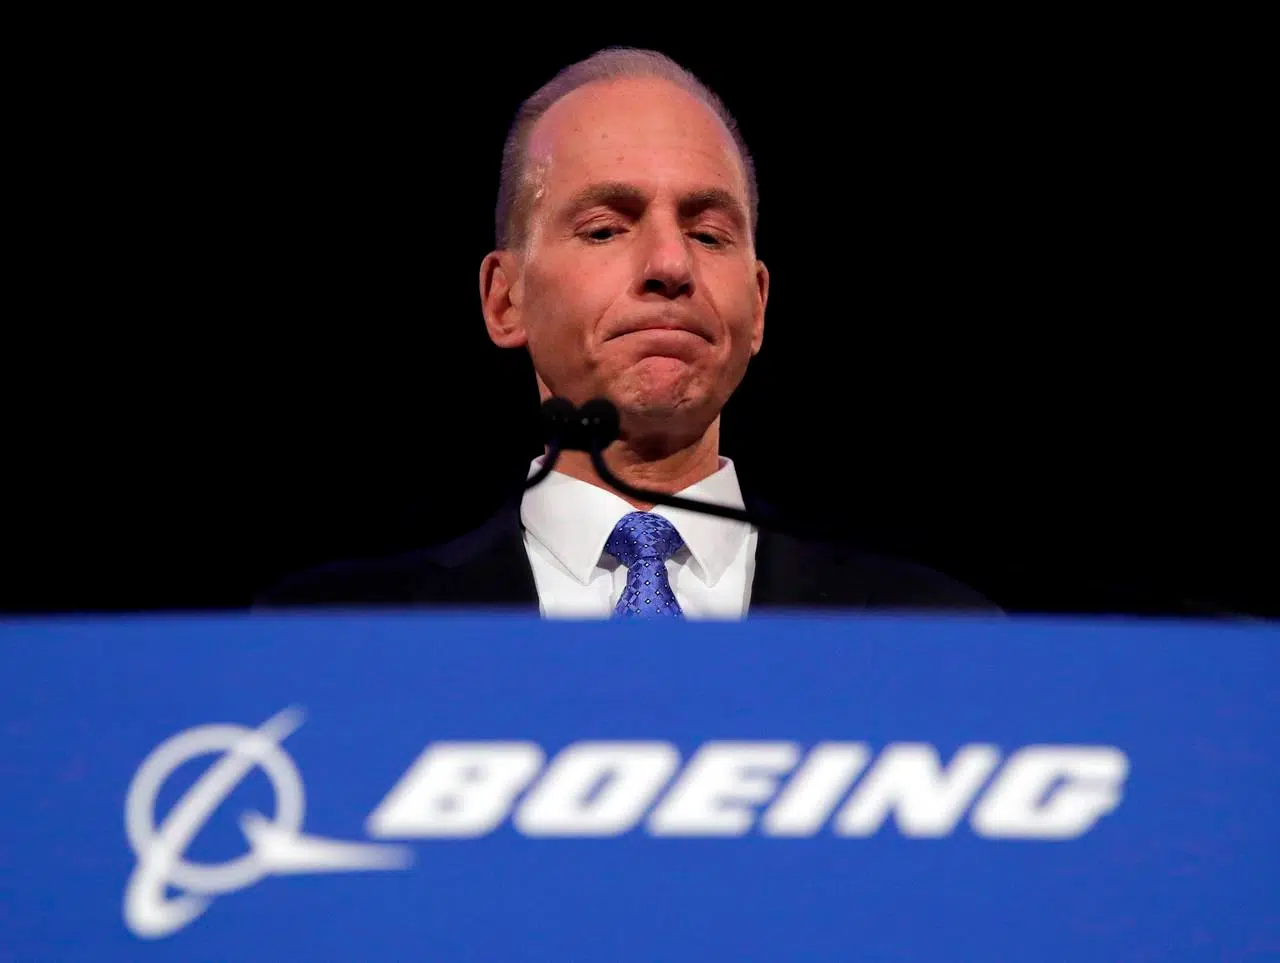 CEO: Boeing made mistake in handling warning-system problem